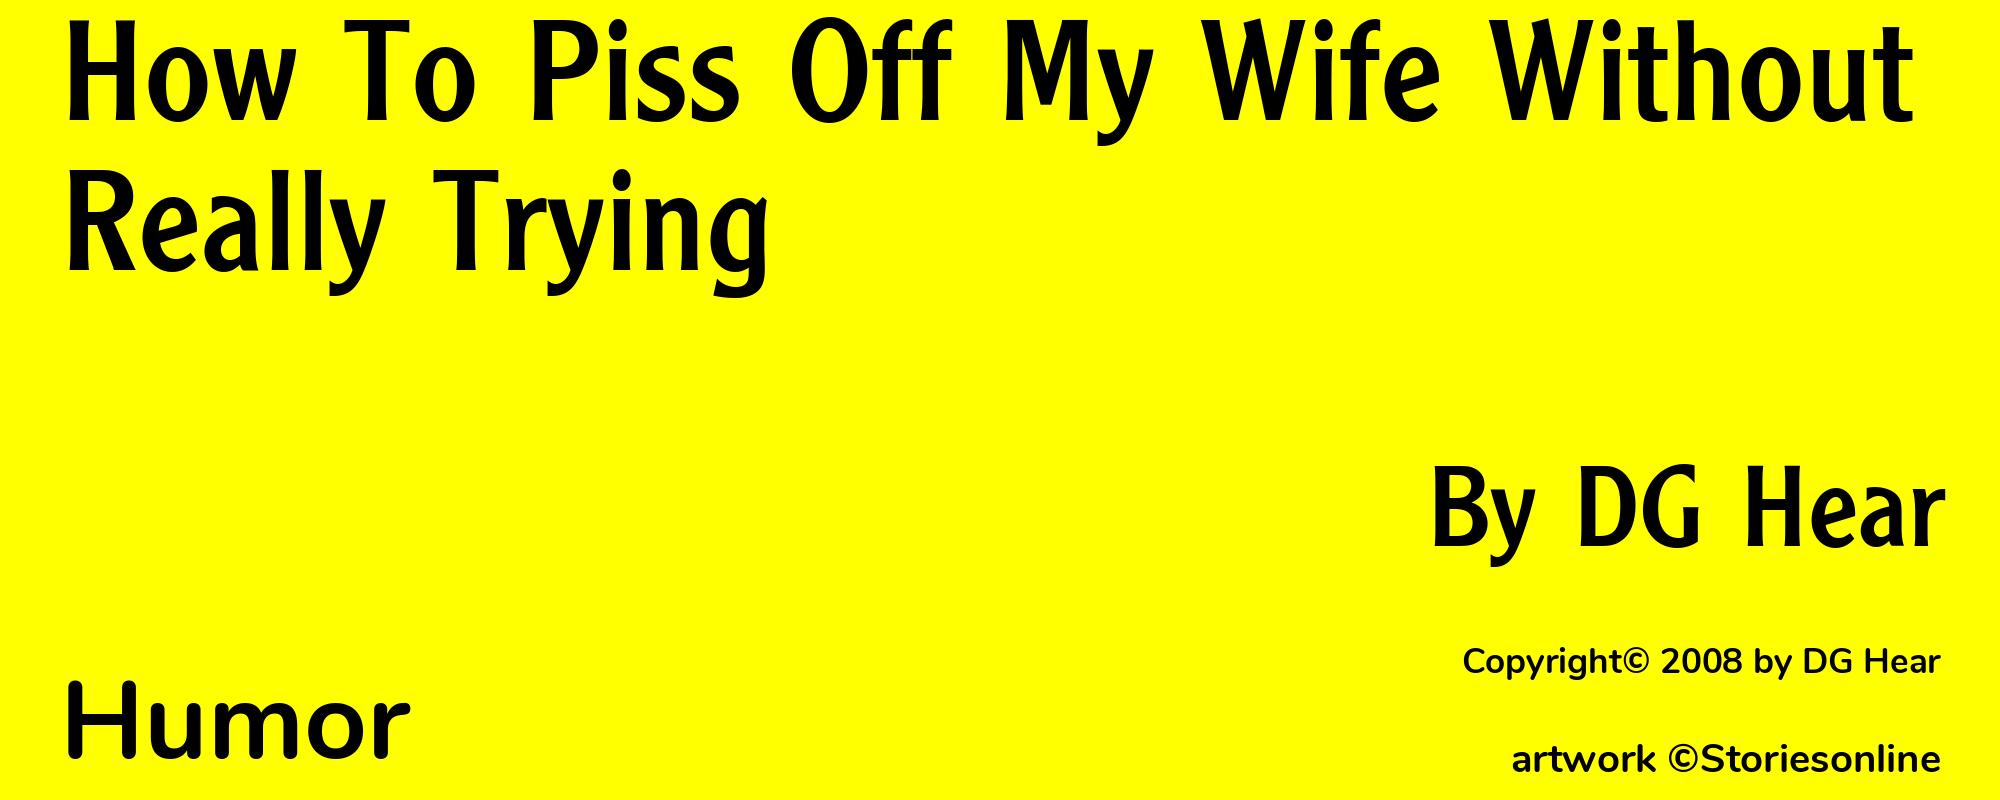 How To Piss Off My Wife Without Really Trying - Cover